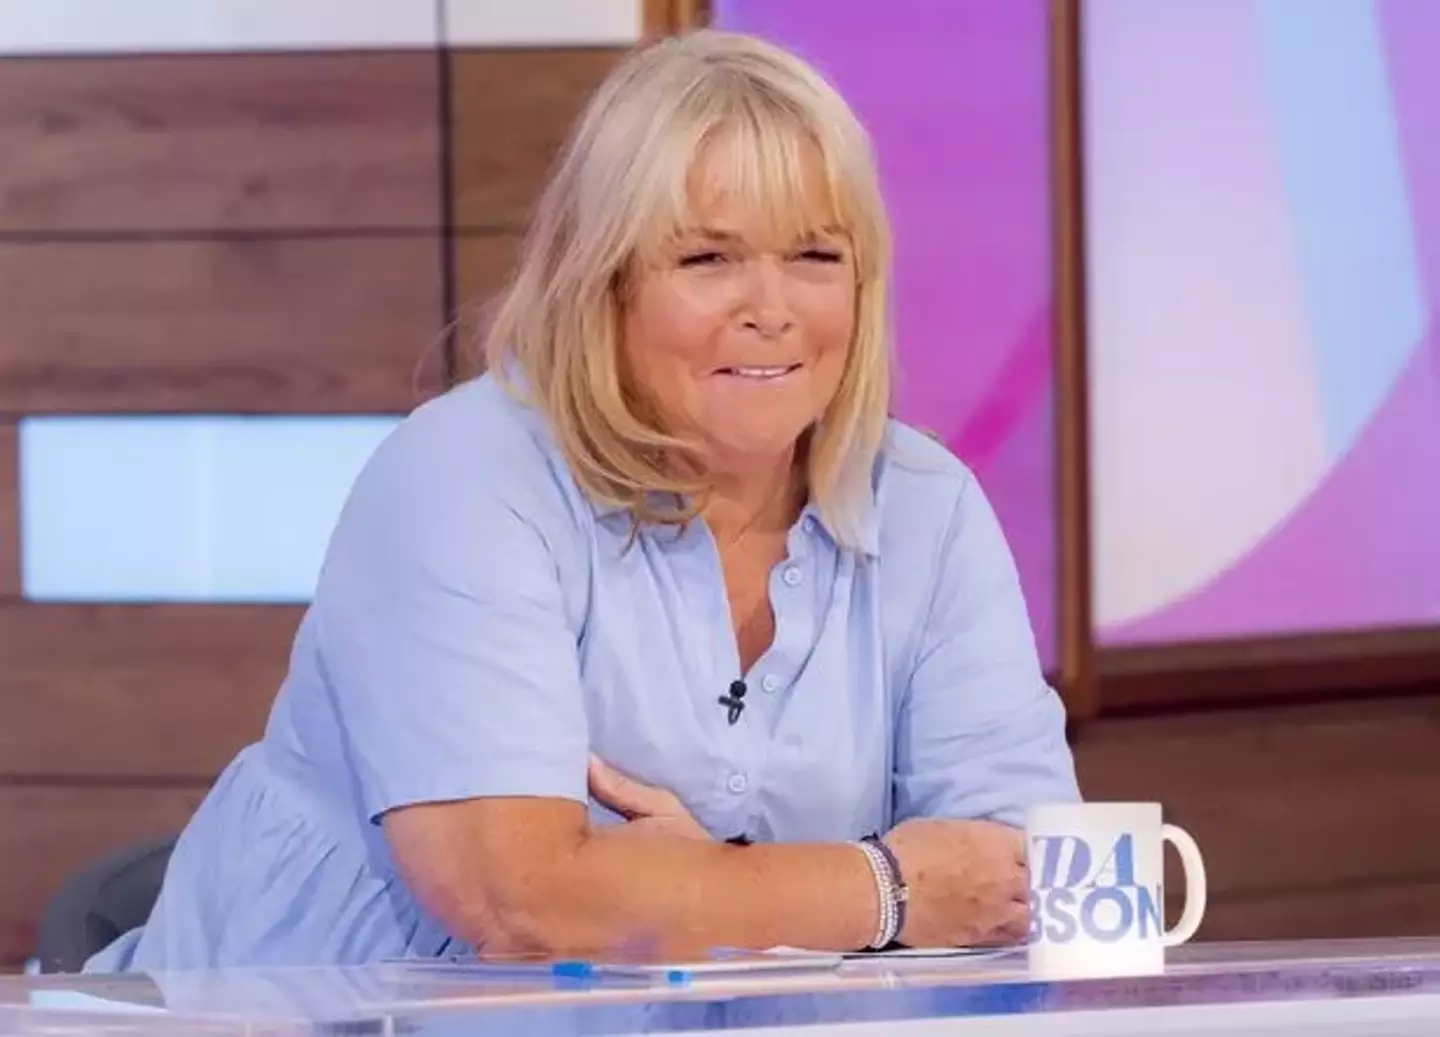 Loose Women's Linda Robson has announced she is single after splitting from husband Mark Dunford.